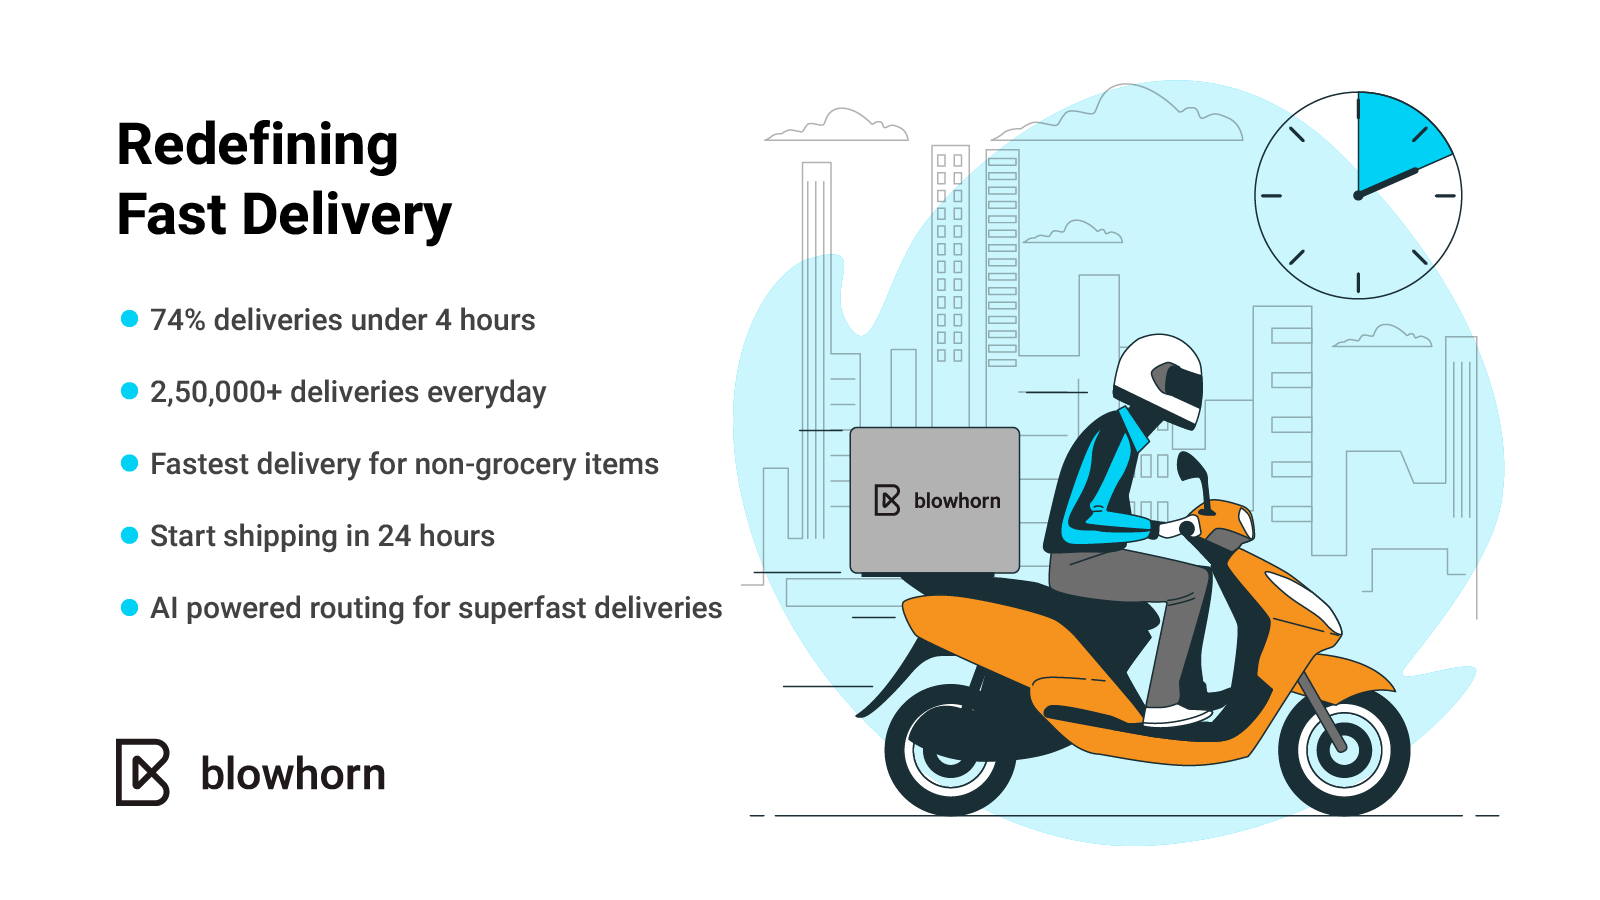 Redefining Fast Delivery